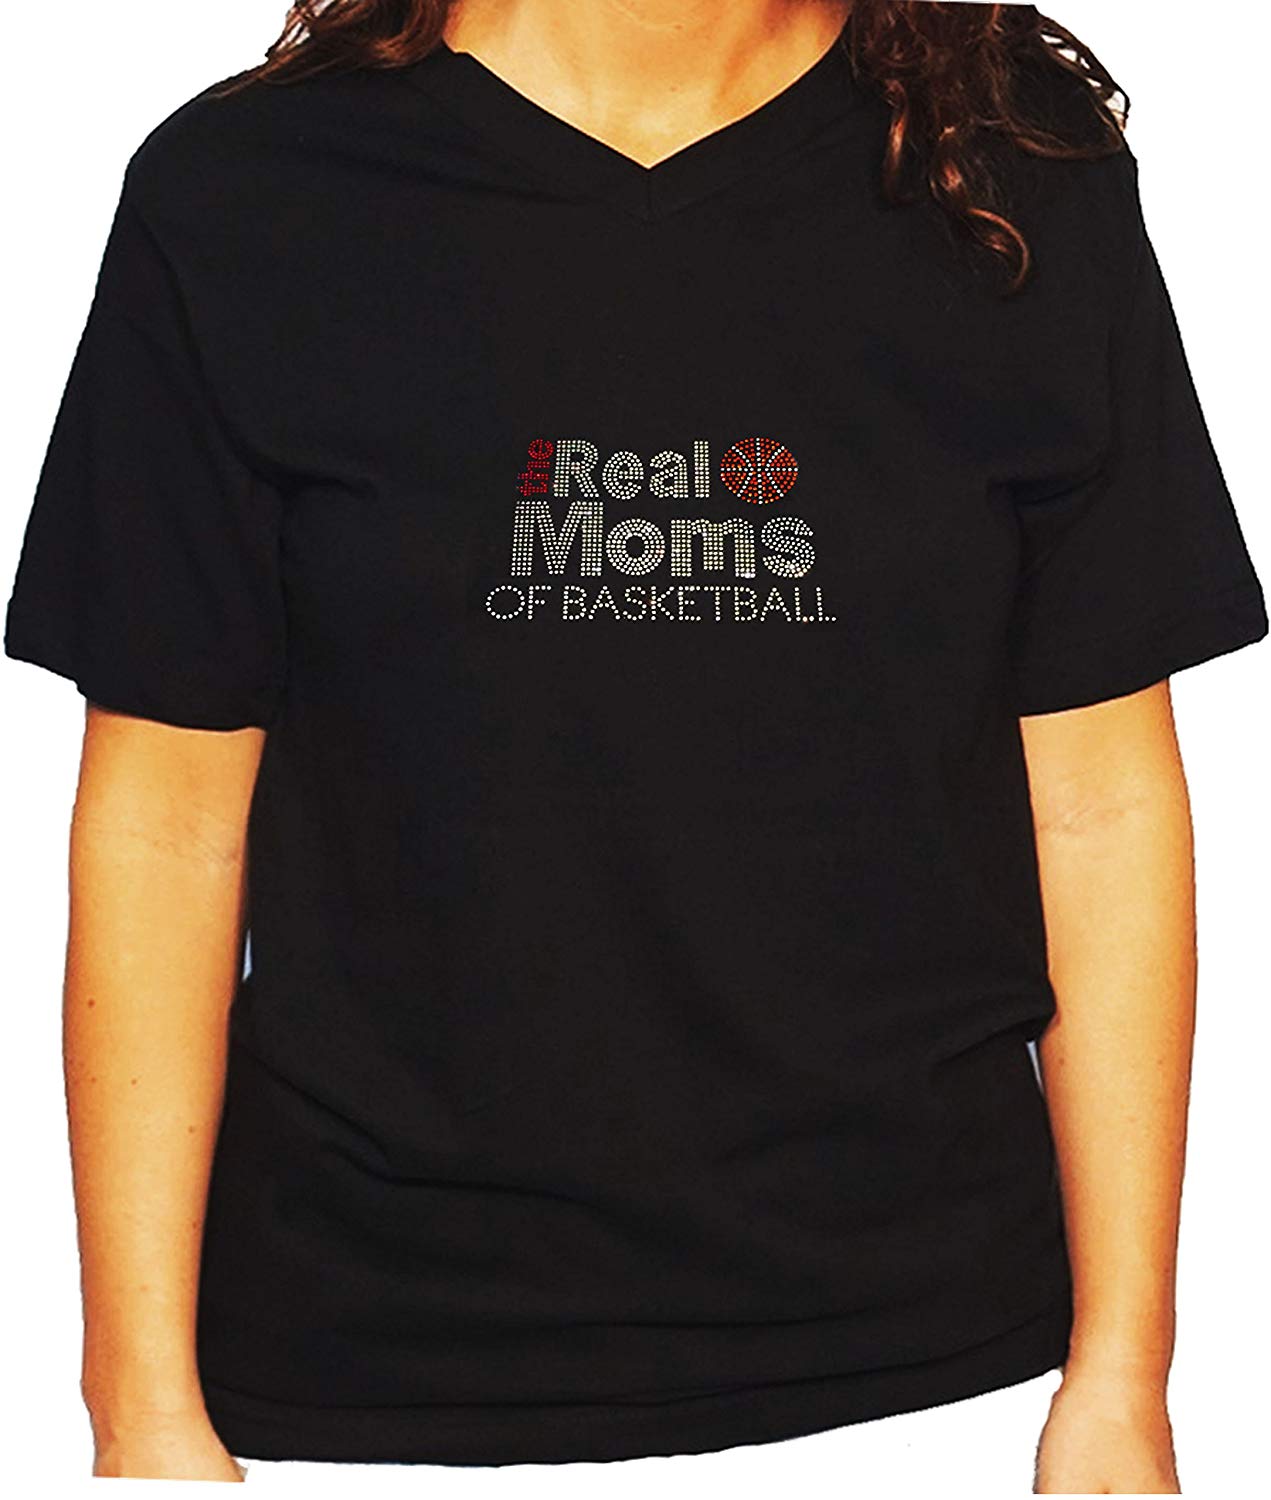 Women's / Unisex T-Shirt with The Real Moms of Basketball in Rhinestones